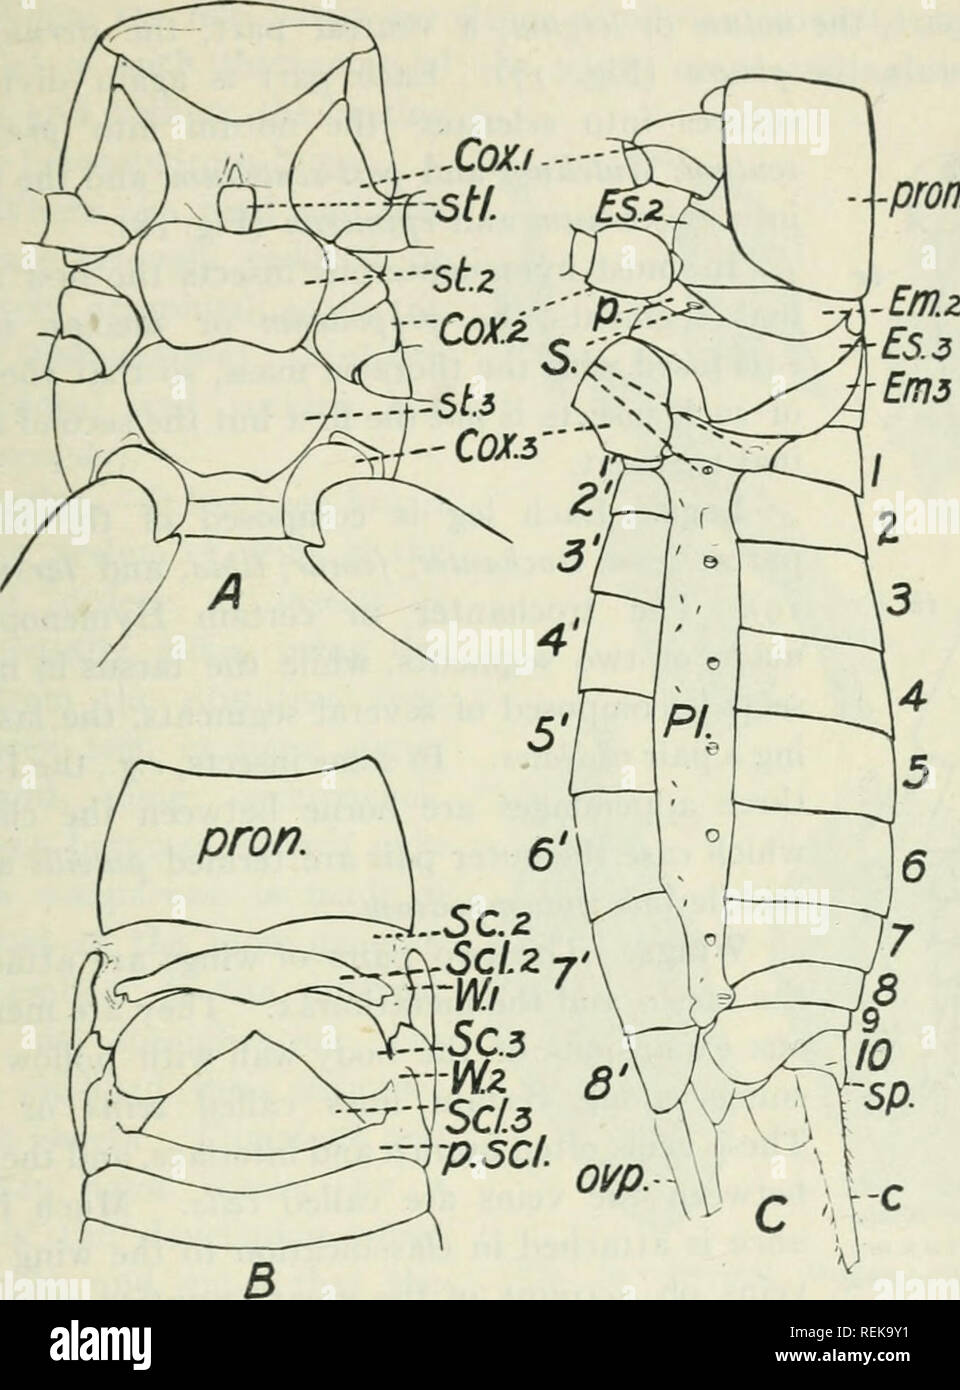 . Class book of economic entomology, with special reference to the economic insects of the northern United States and Canada. Beneficial insects; Insect pests; Insects; Insects. STRUCTURE, GROWTH AND ECONOMICS OF INSECTS 13 Special Organs of Sense.—The halteres of Diptera contain sensory organs, but their function has not yet been definitely ascertained. pron.. Fig. 18.—Gryllus pennsylvanicus. A, Ventral view of thorax; B, dorsal view of thorax, distal portion of pronotum removed; C, lateral view of thorax and abdomen. Cox., Cox.2, C0X.3, First, second and third coxae; Stl., prosternellum; St. Stock Photo